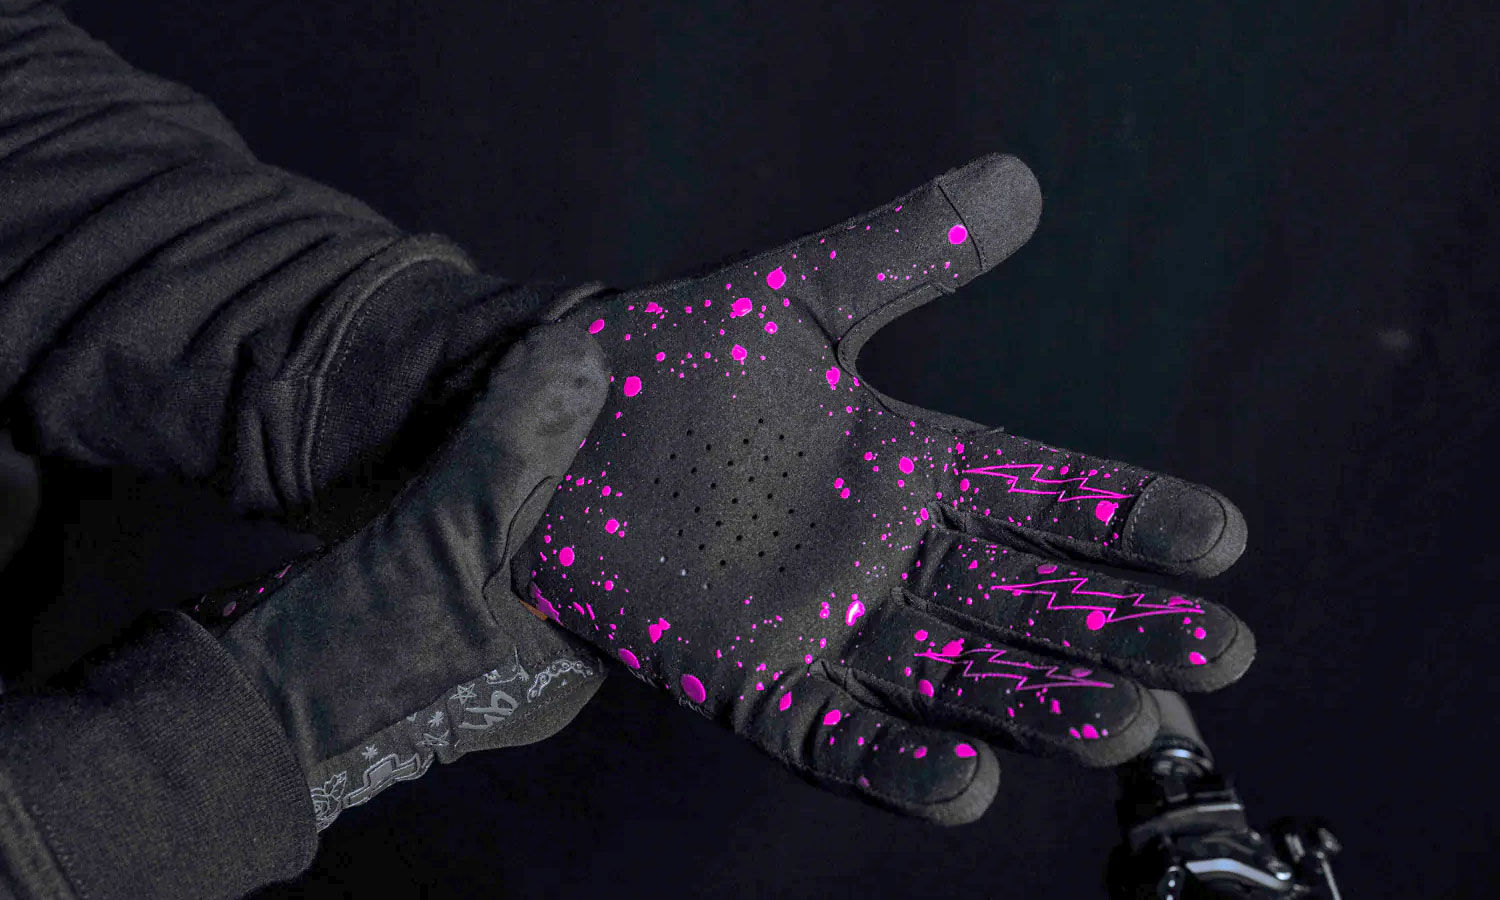 Muc-Off D3O Rider Gloves deliver impact protection for aggressive mountain biking, perforated palm